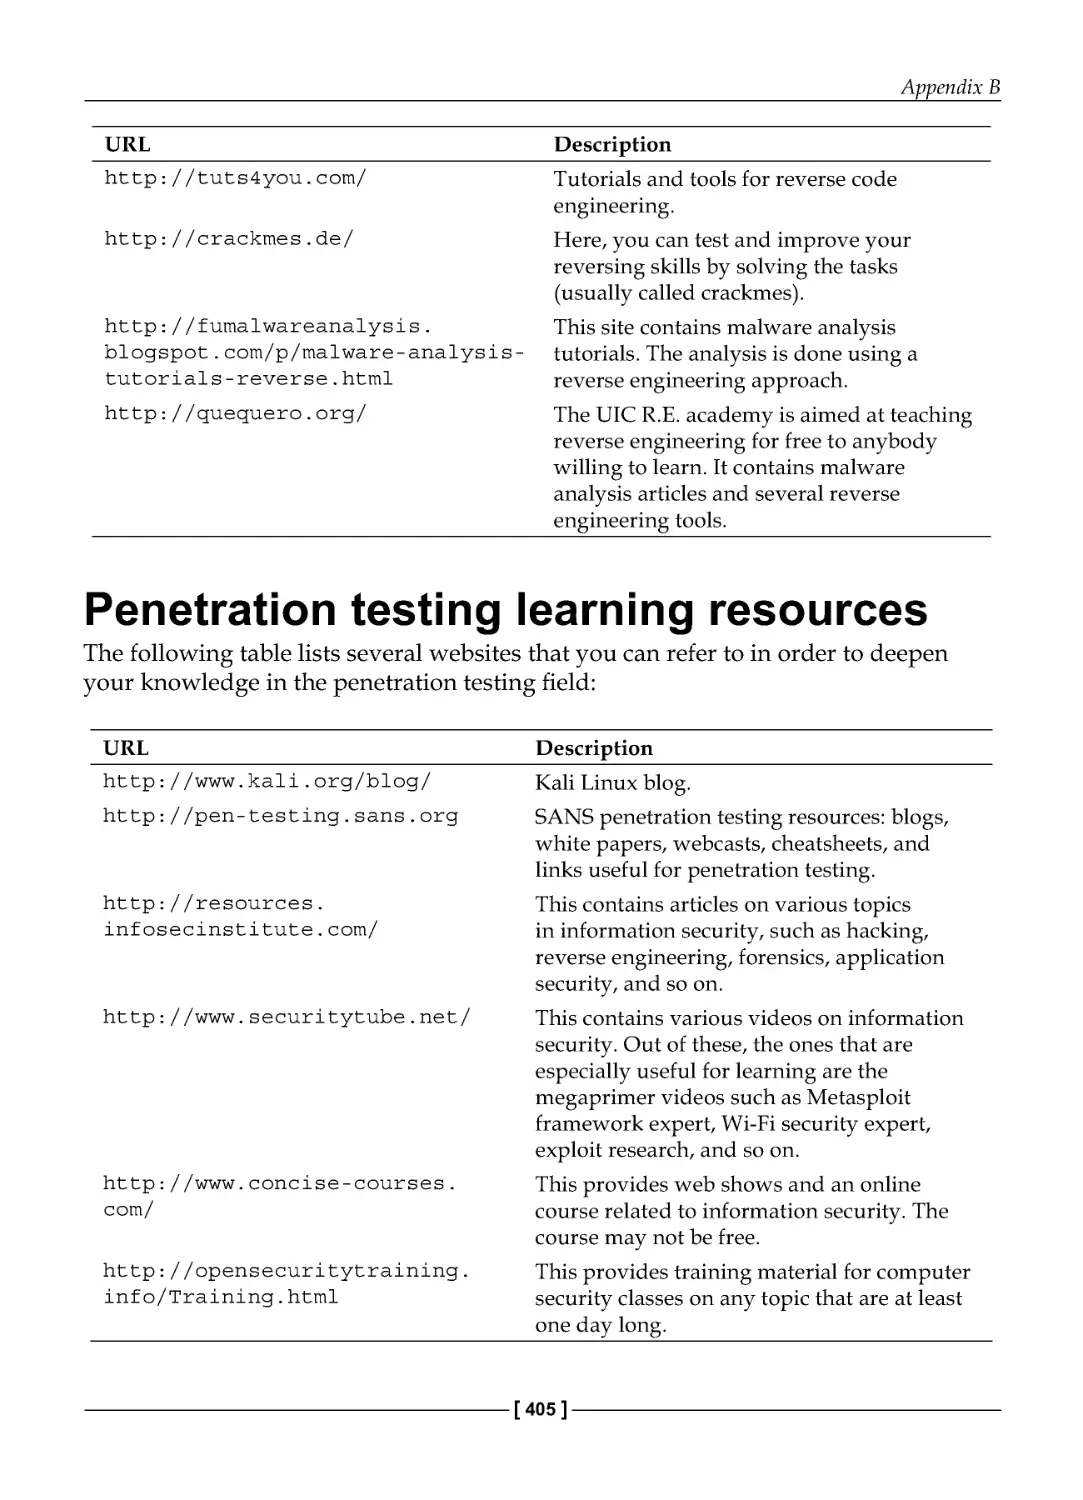 Penetration testing learning resources